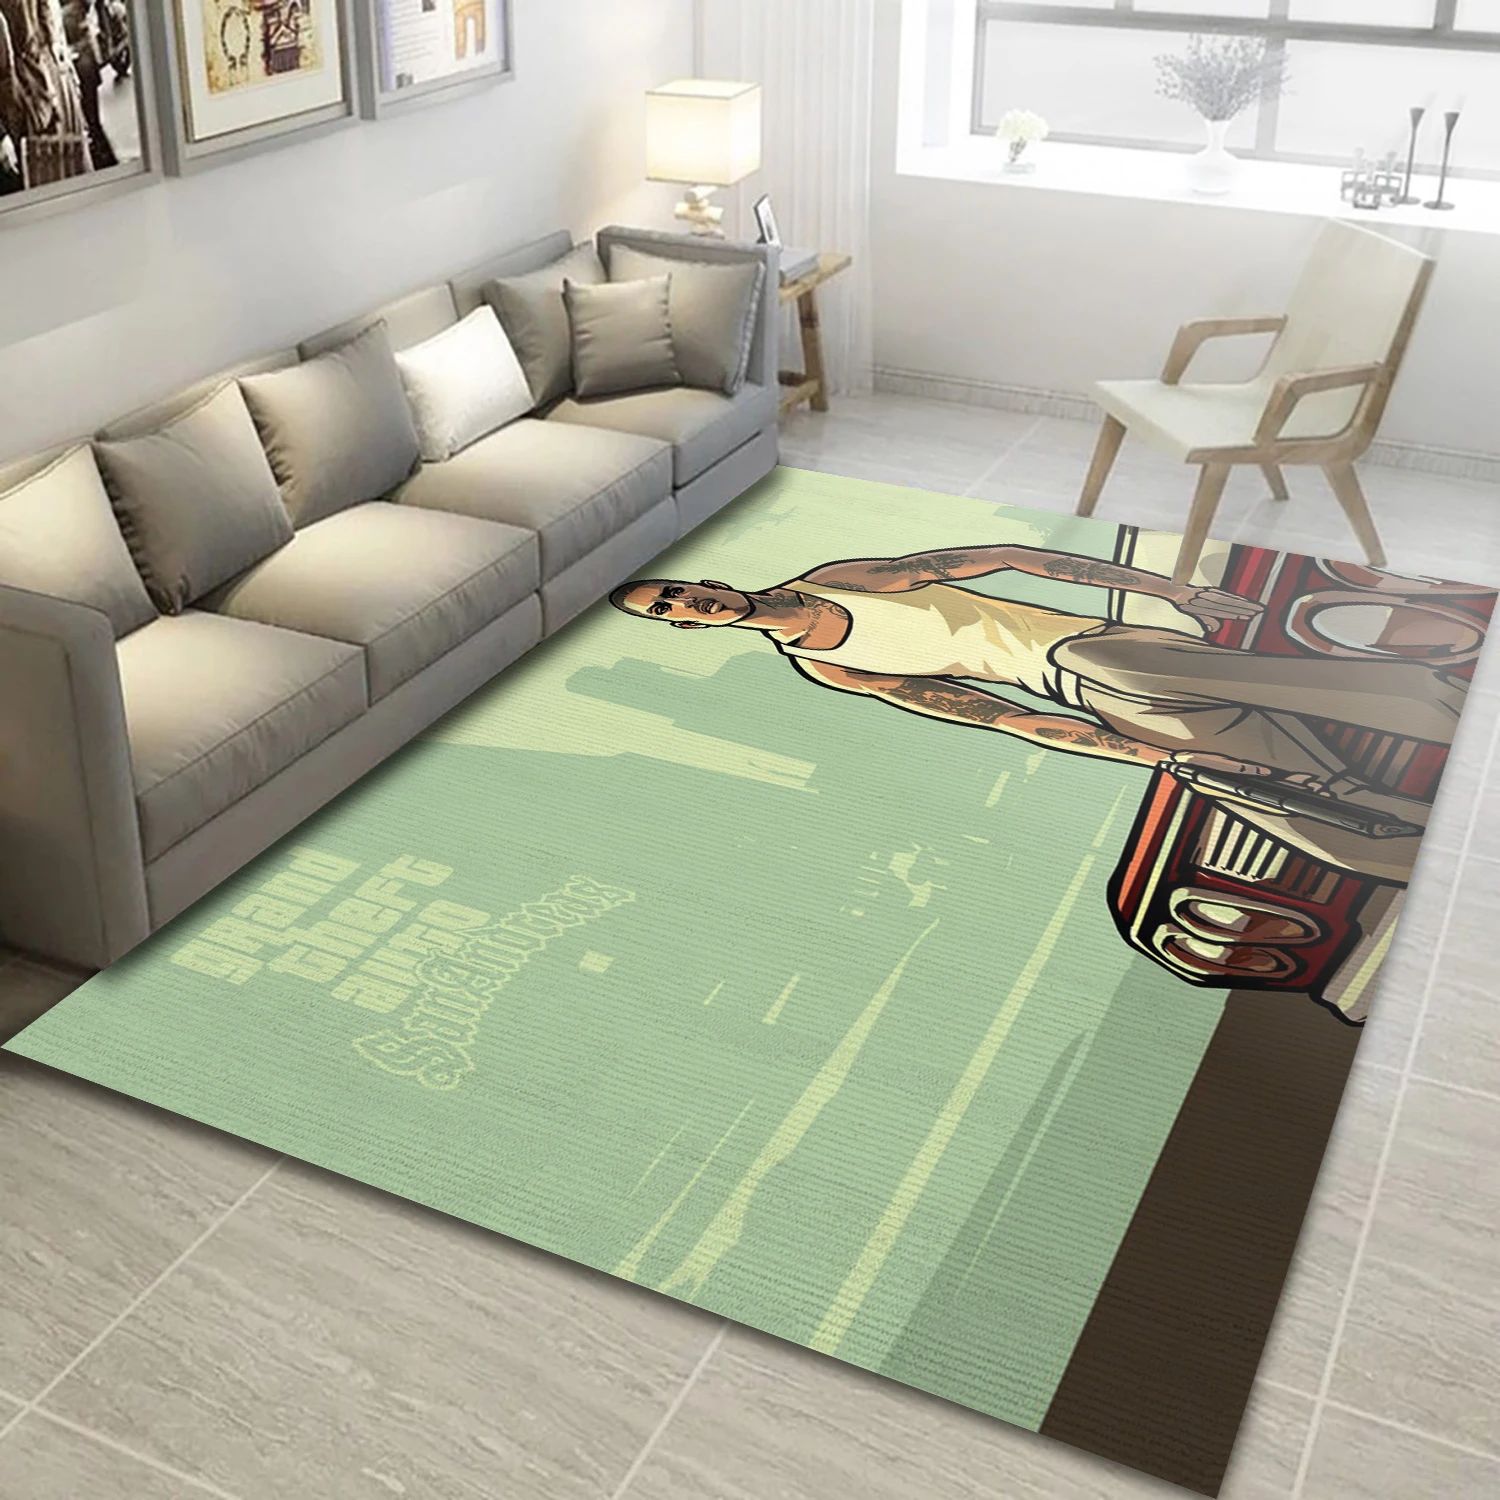 Grand Theft Auto San Andreas Video Game Reangle Rug, Area Rug - Family Gift US Decor - Indoor Outdoor Rugs